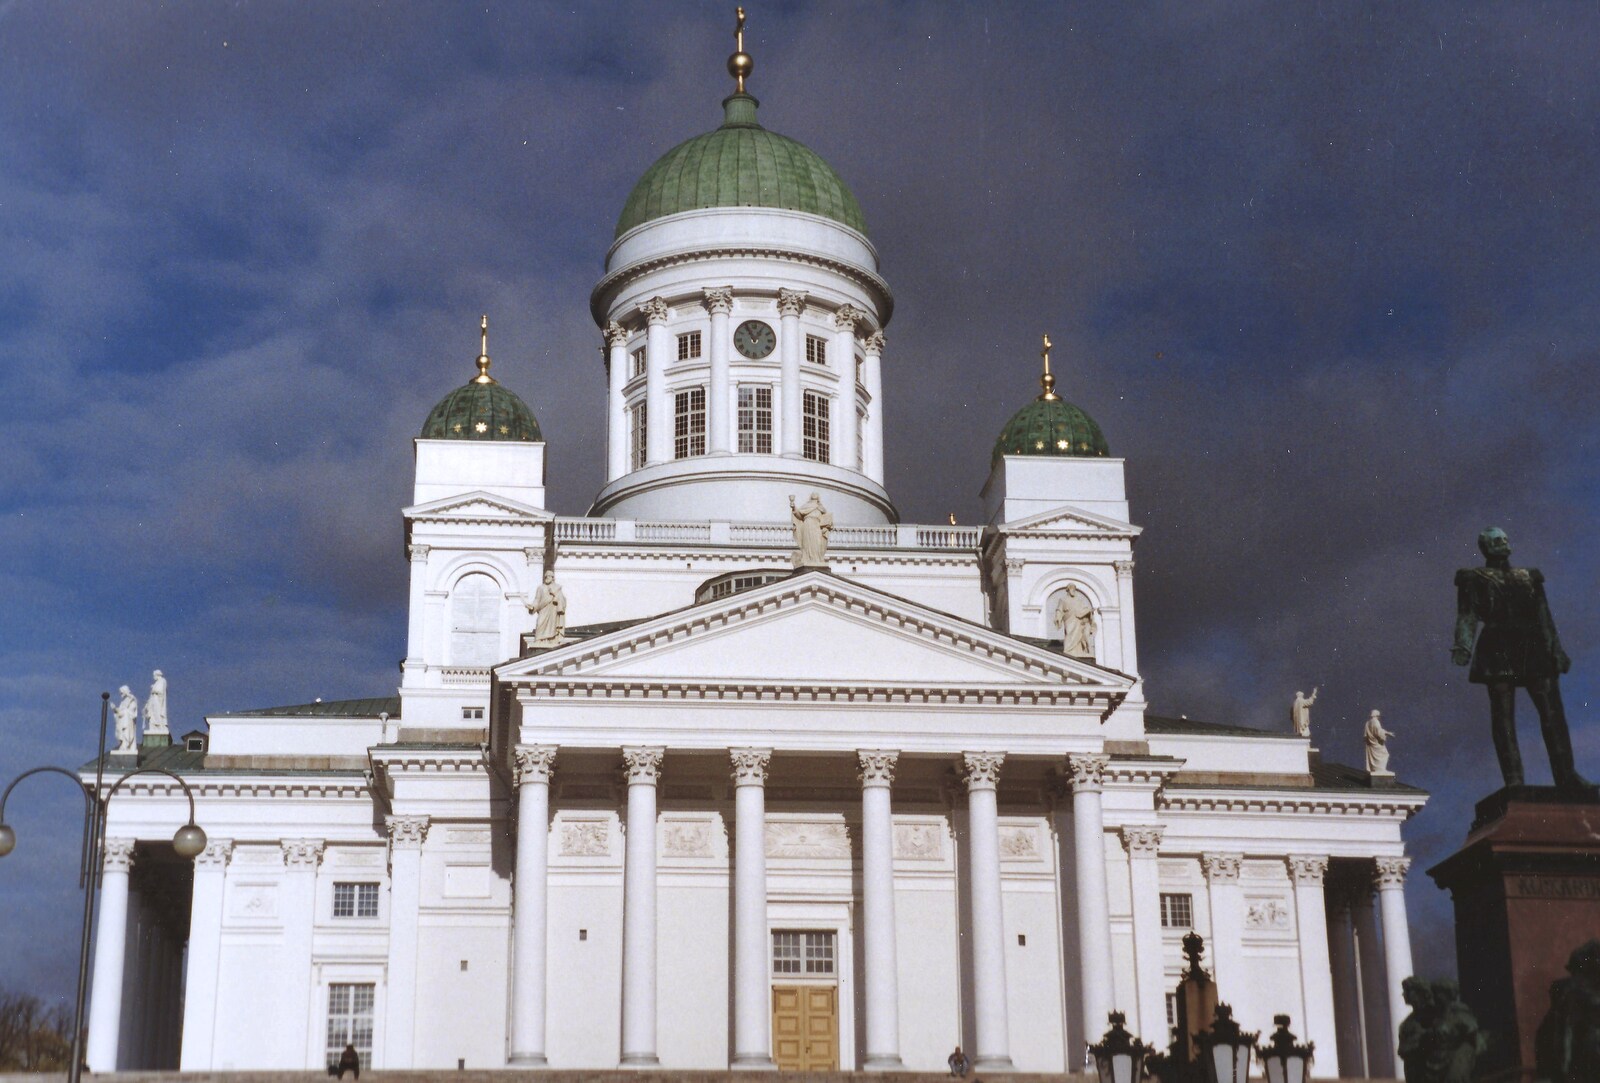 Helsinki Cathedral in Senate Square from A Trip to Rovaniemi and the Arctic Circle, Lapland, Finland - 28th November 1999